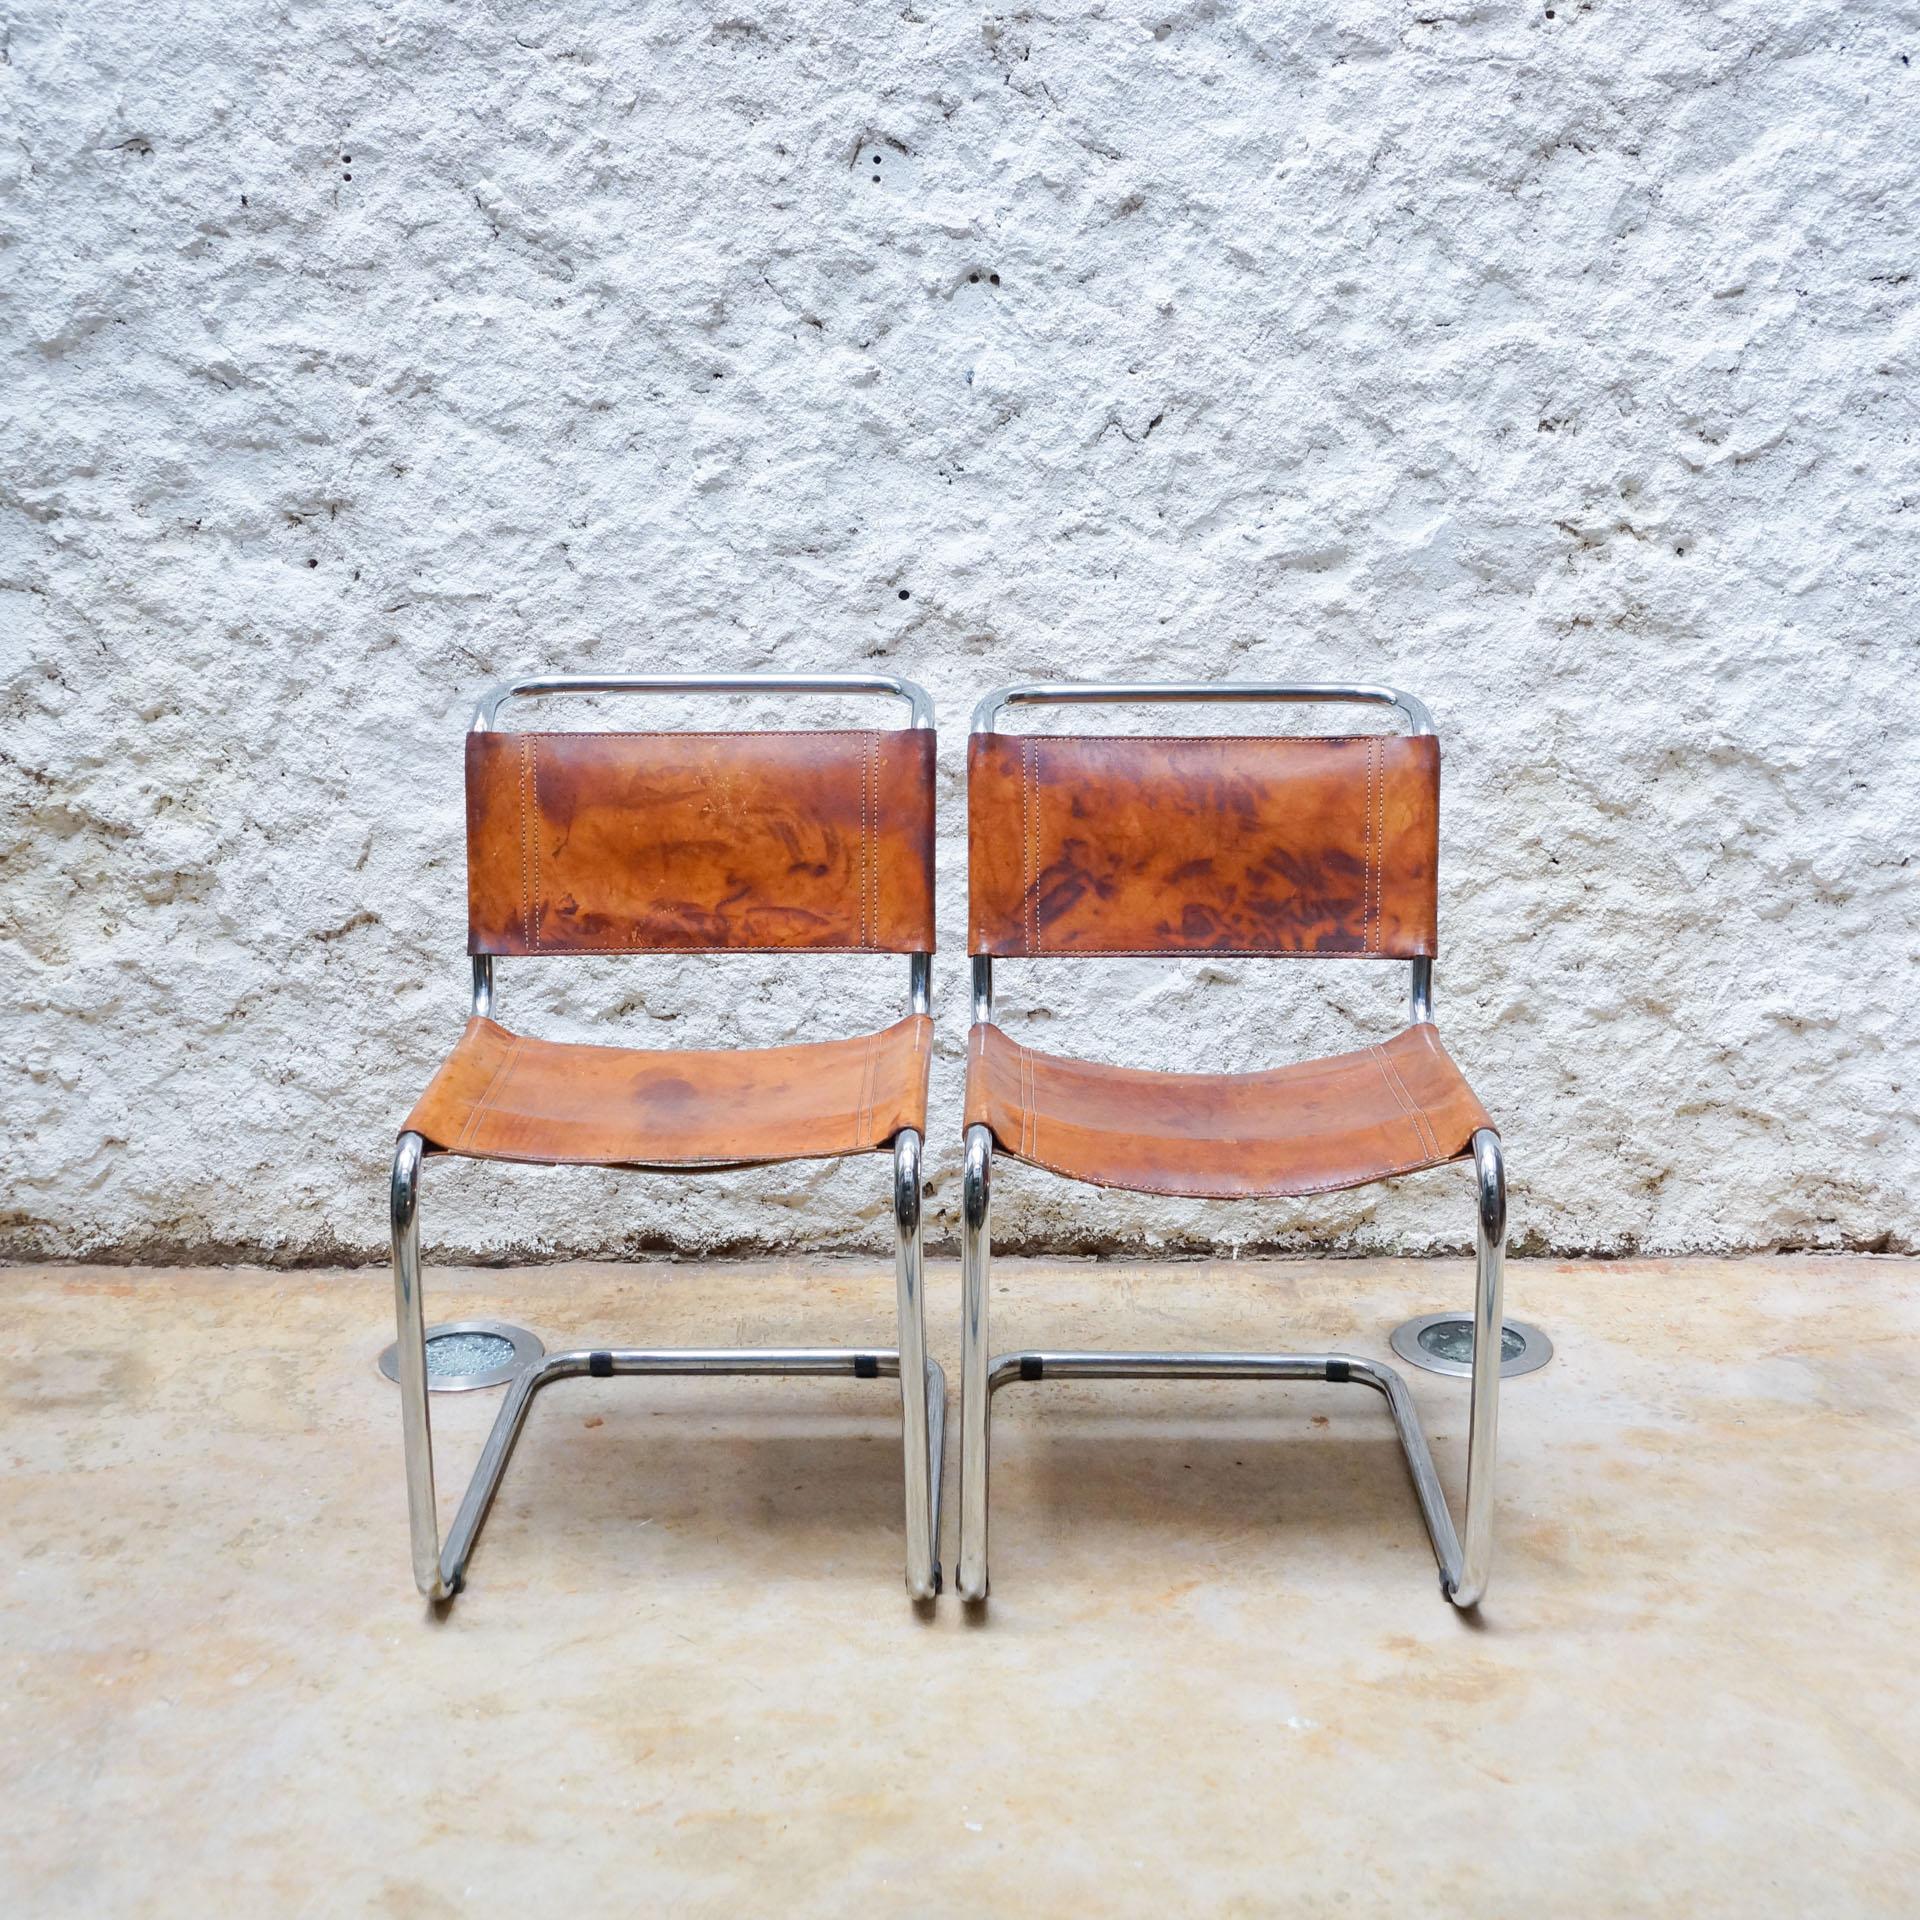 Chair designed by Marcel Breuer.
By unknown manufacturer, circa 1970, Italy.

Materials:
Leather
Tubular steel with a polished chrome finish

In good original condition, with minor wear consistent with age and use, preserving a beautiful